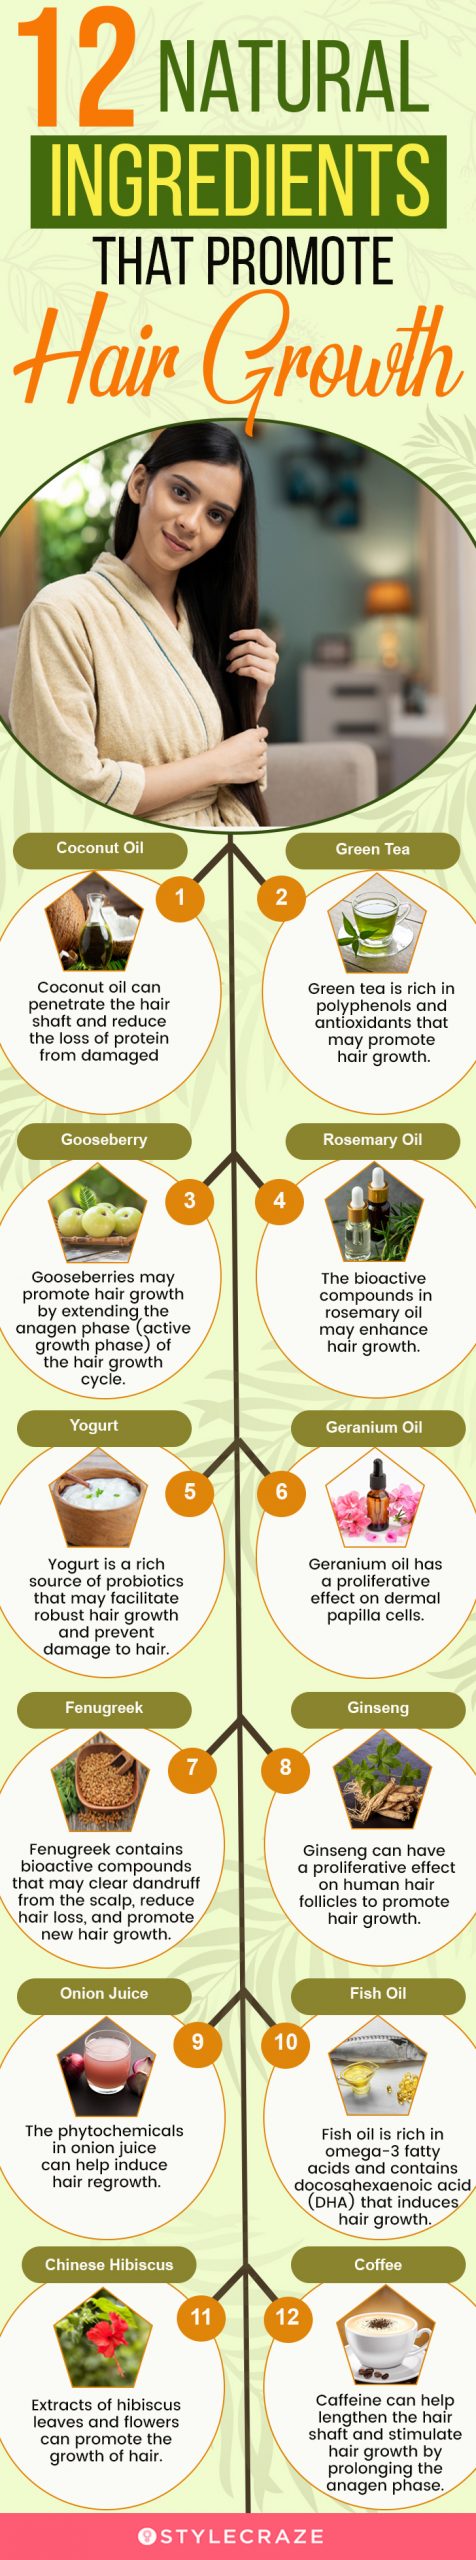 12 natural ingredients that promote hair growth [infographic]